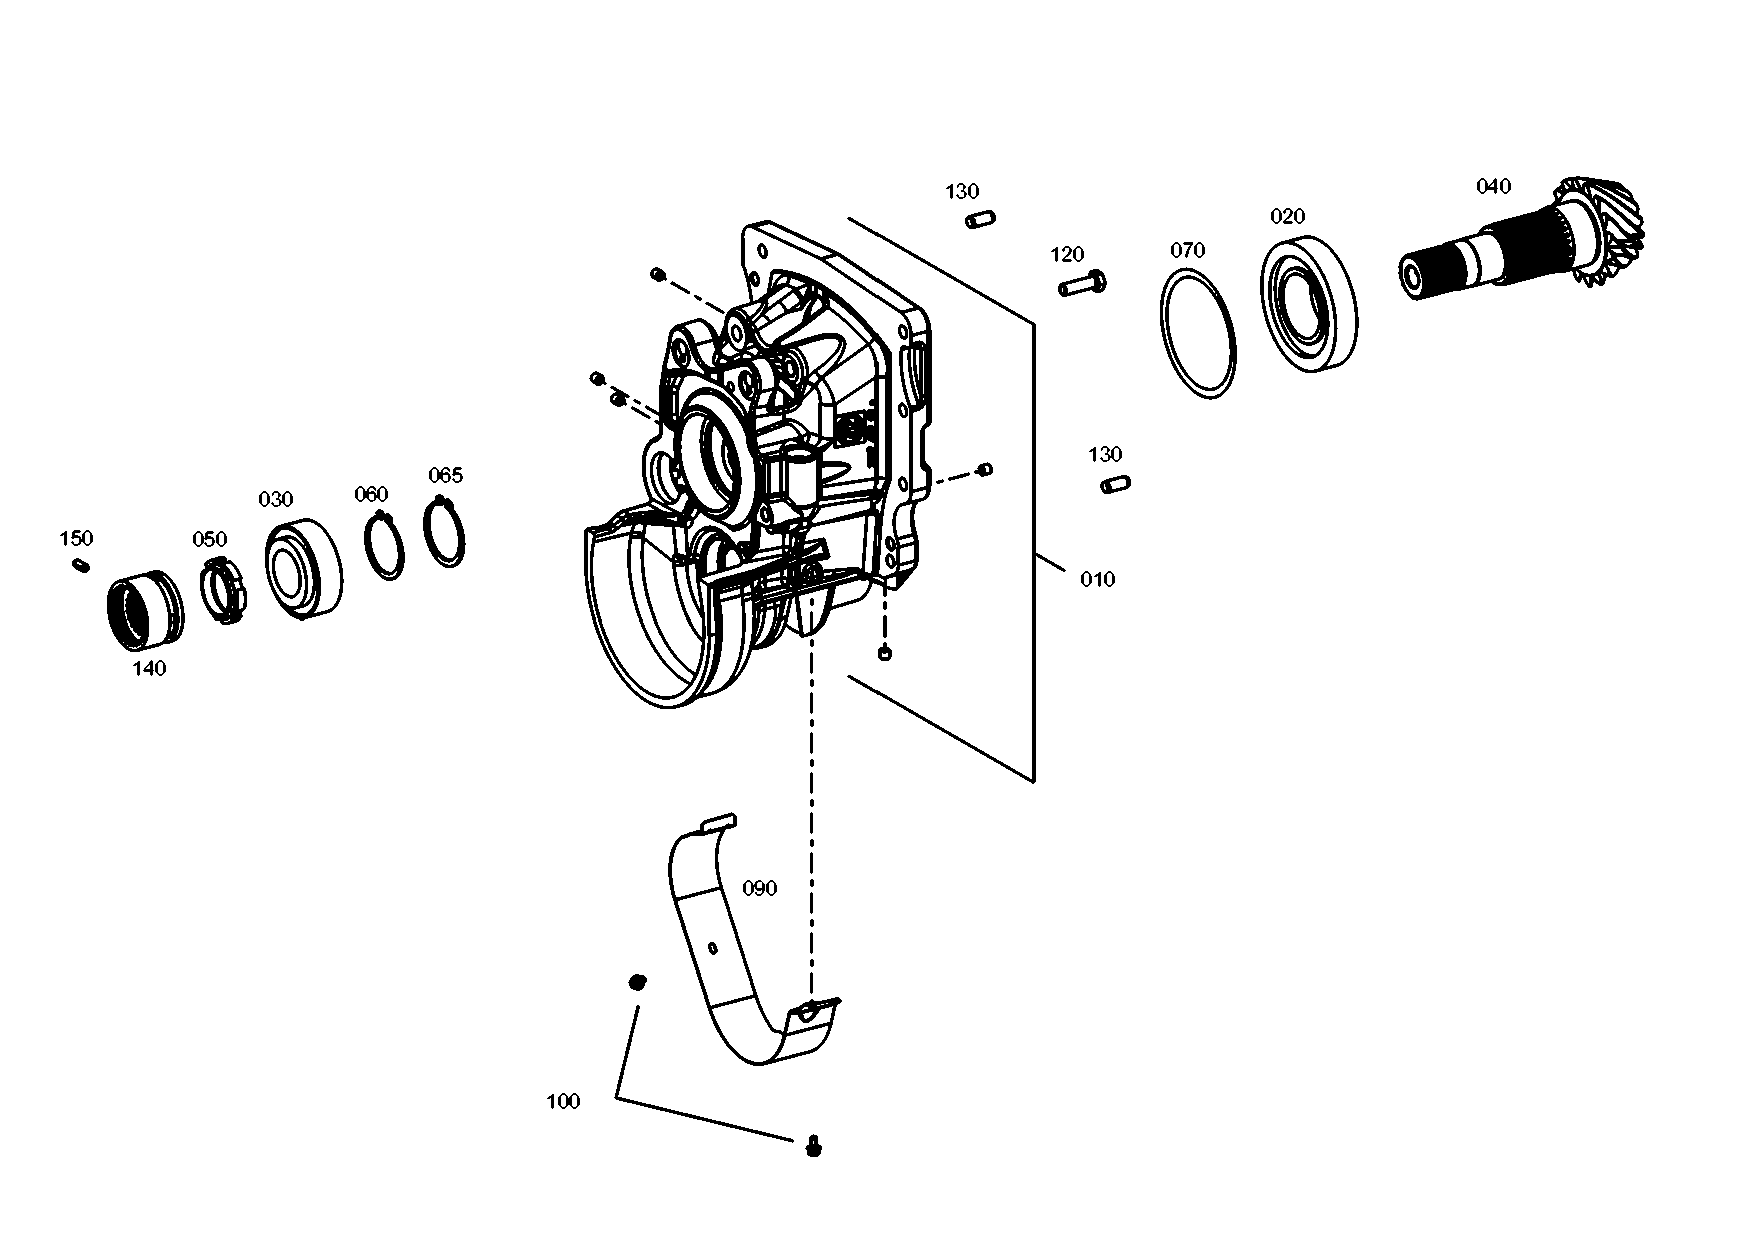 drawing for LUNA EQUIPOS INDUSTRIEALES, S.A. 199118250357 - ADJUSTMENT PLATE (figure 4)